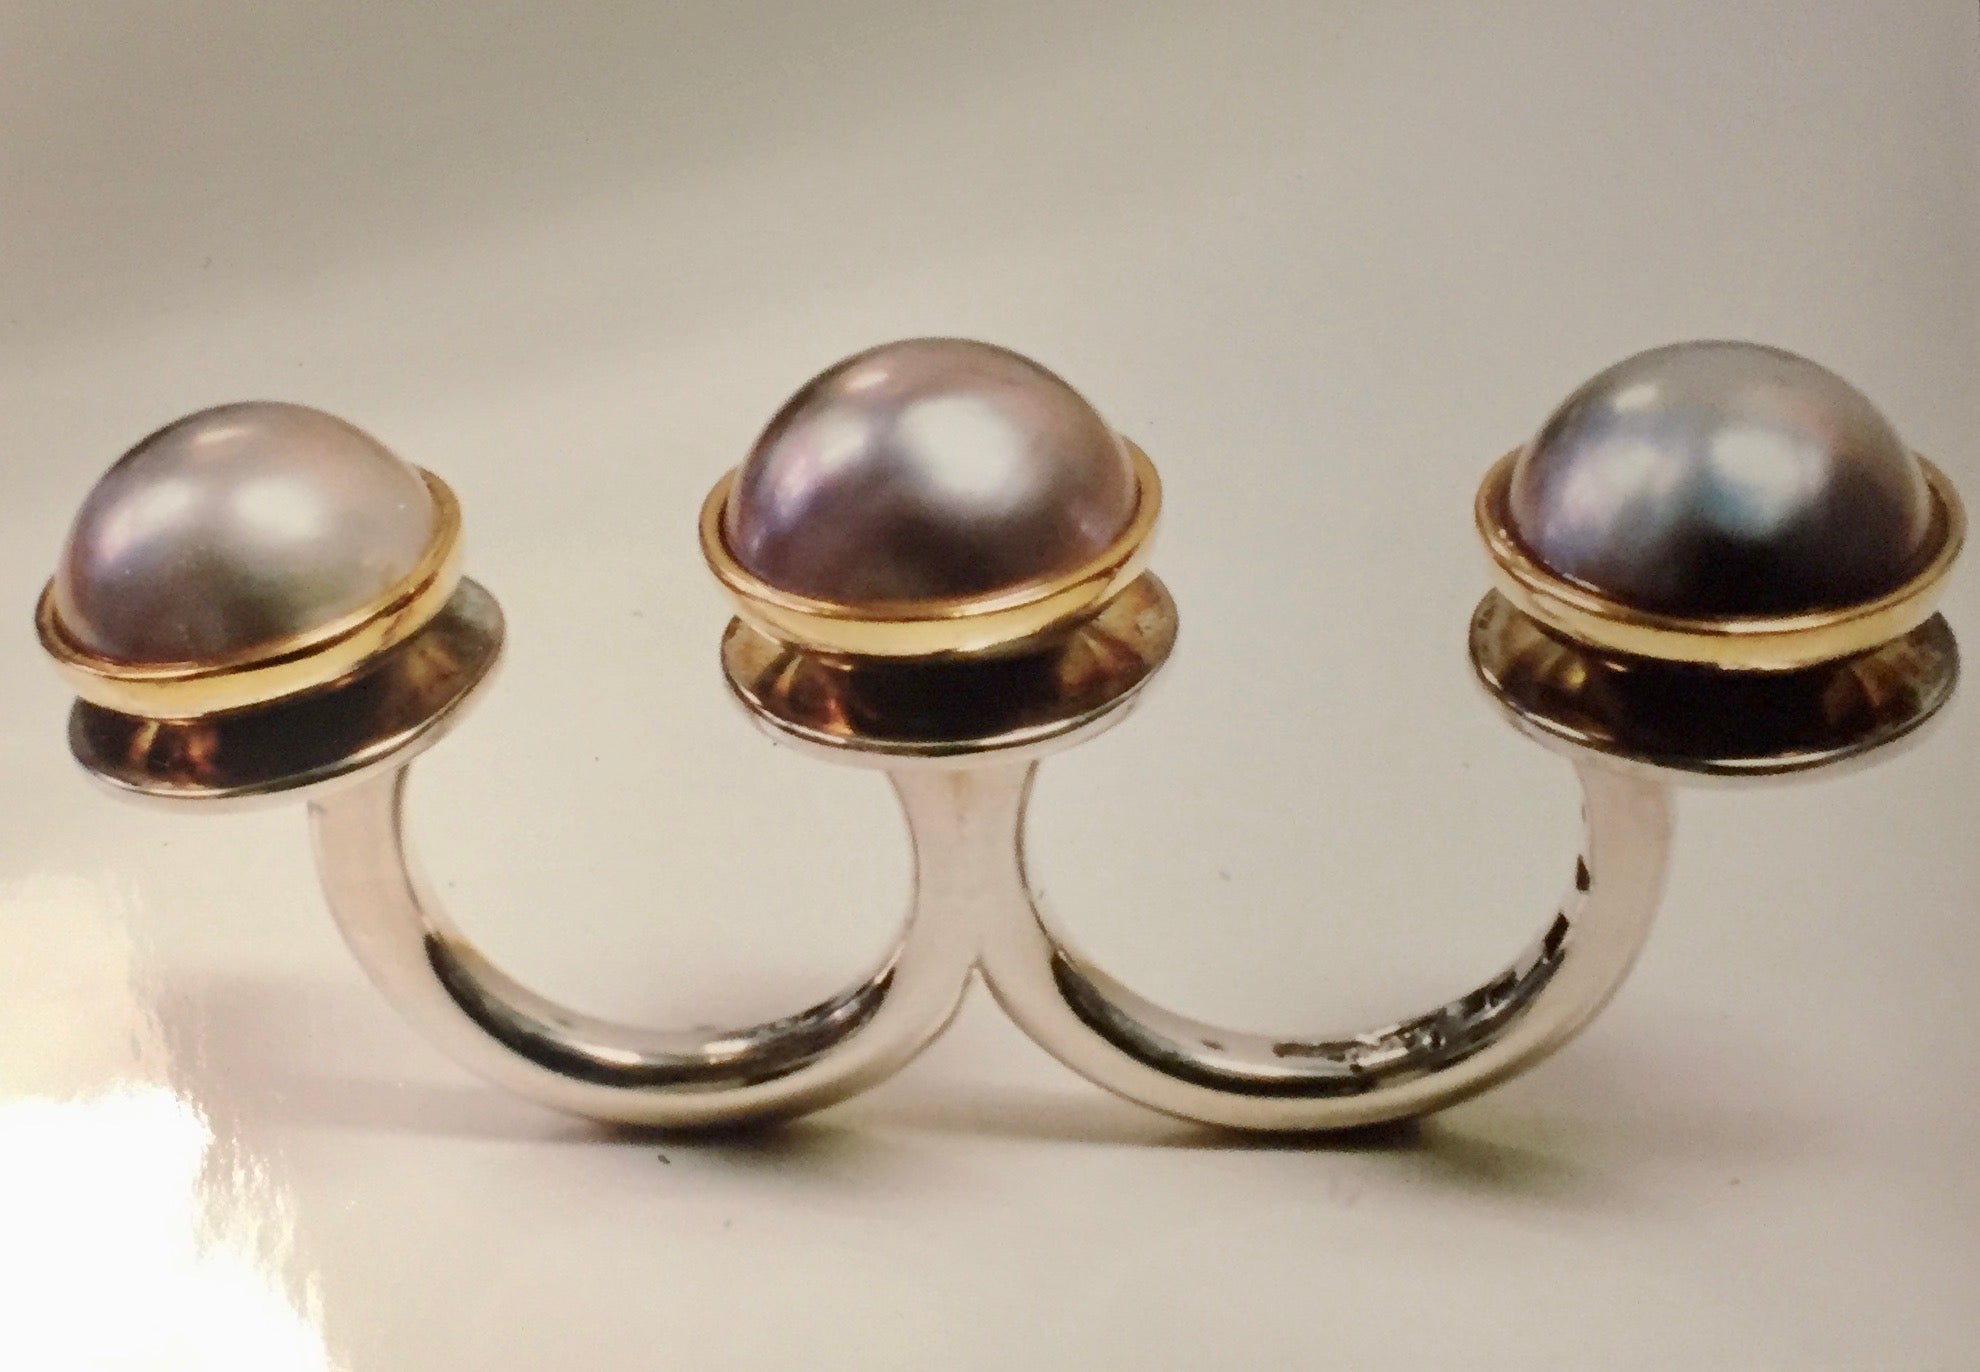 From the Illusions exhibition. A two-finger pearl ring